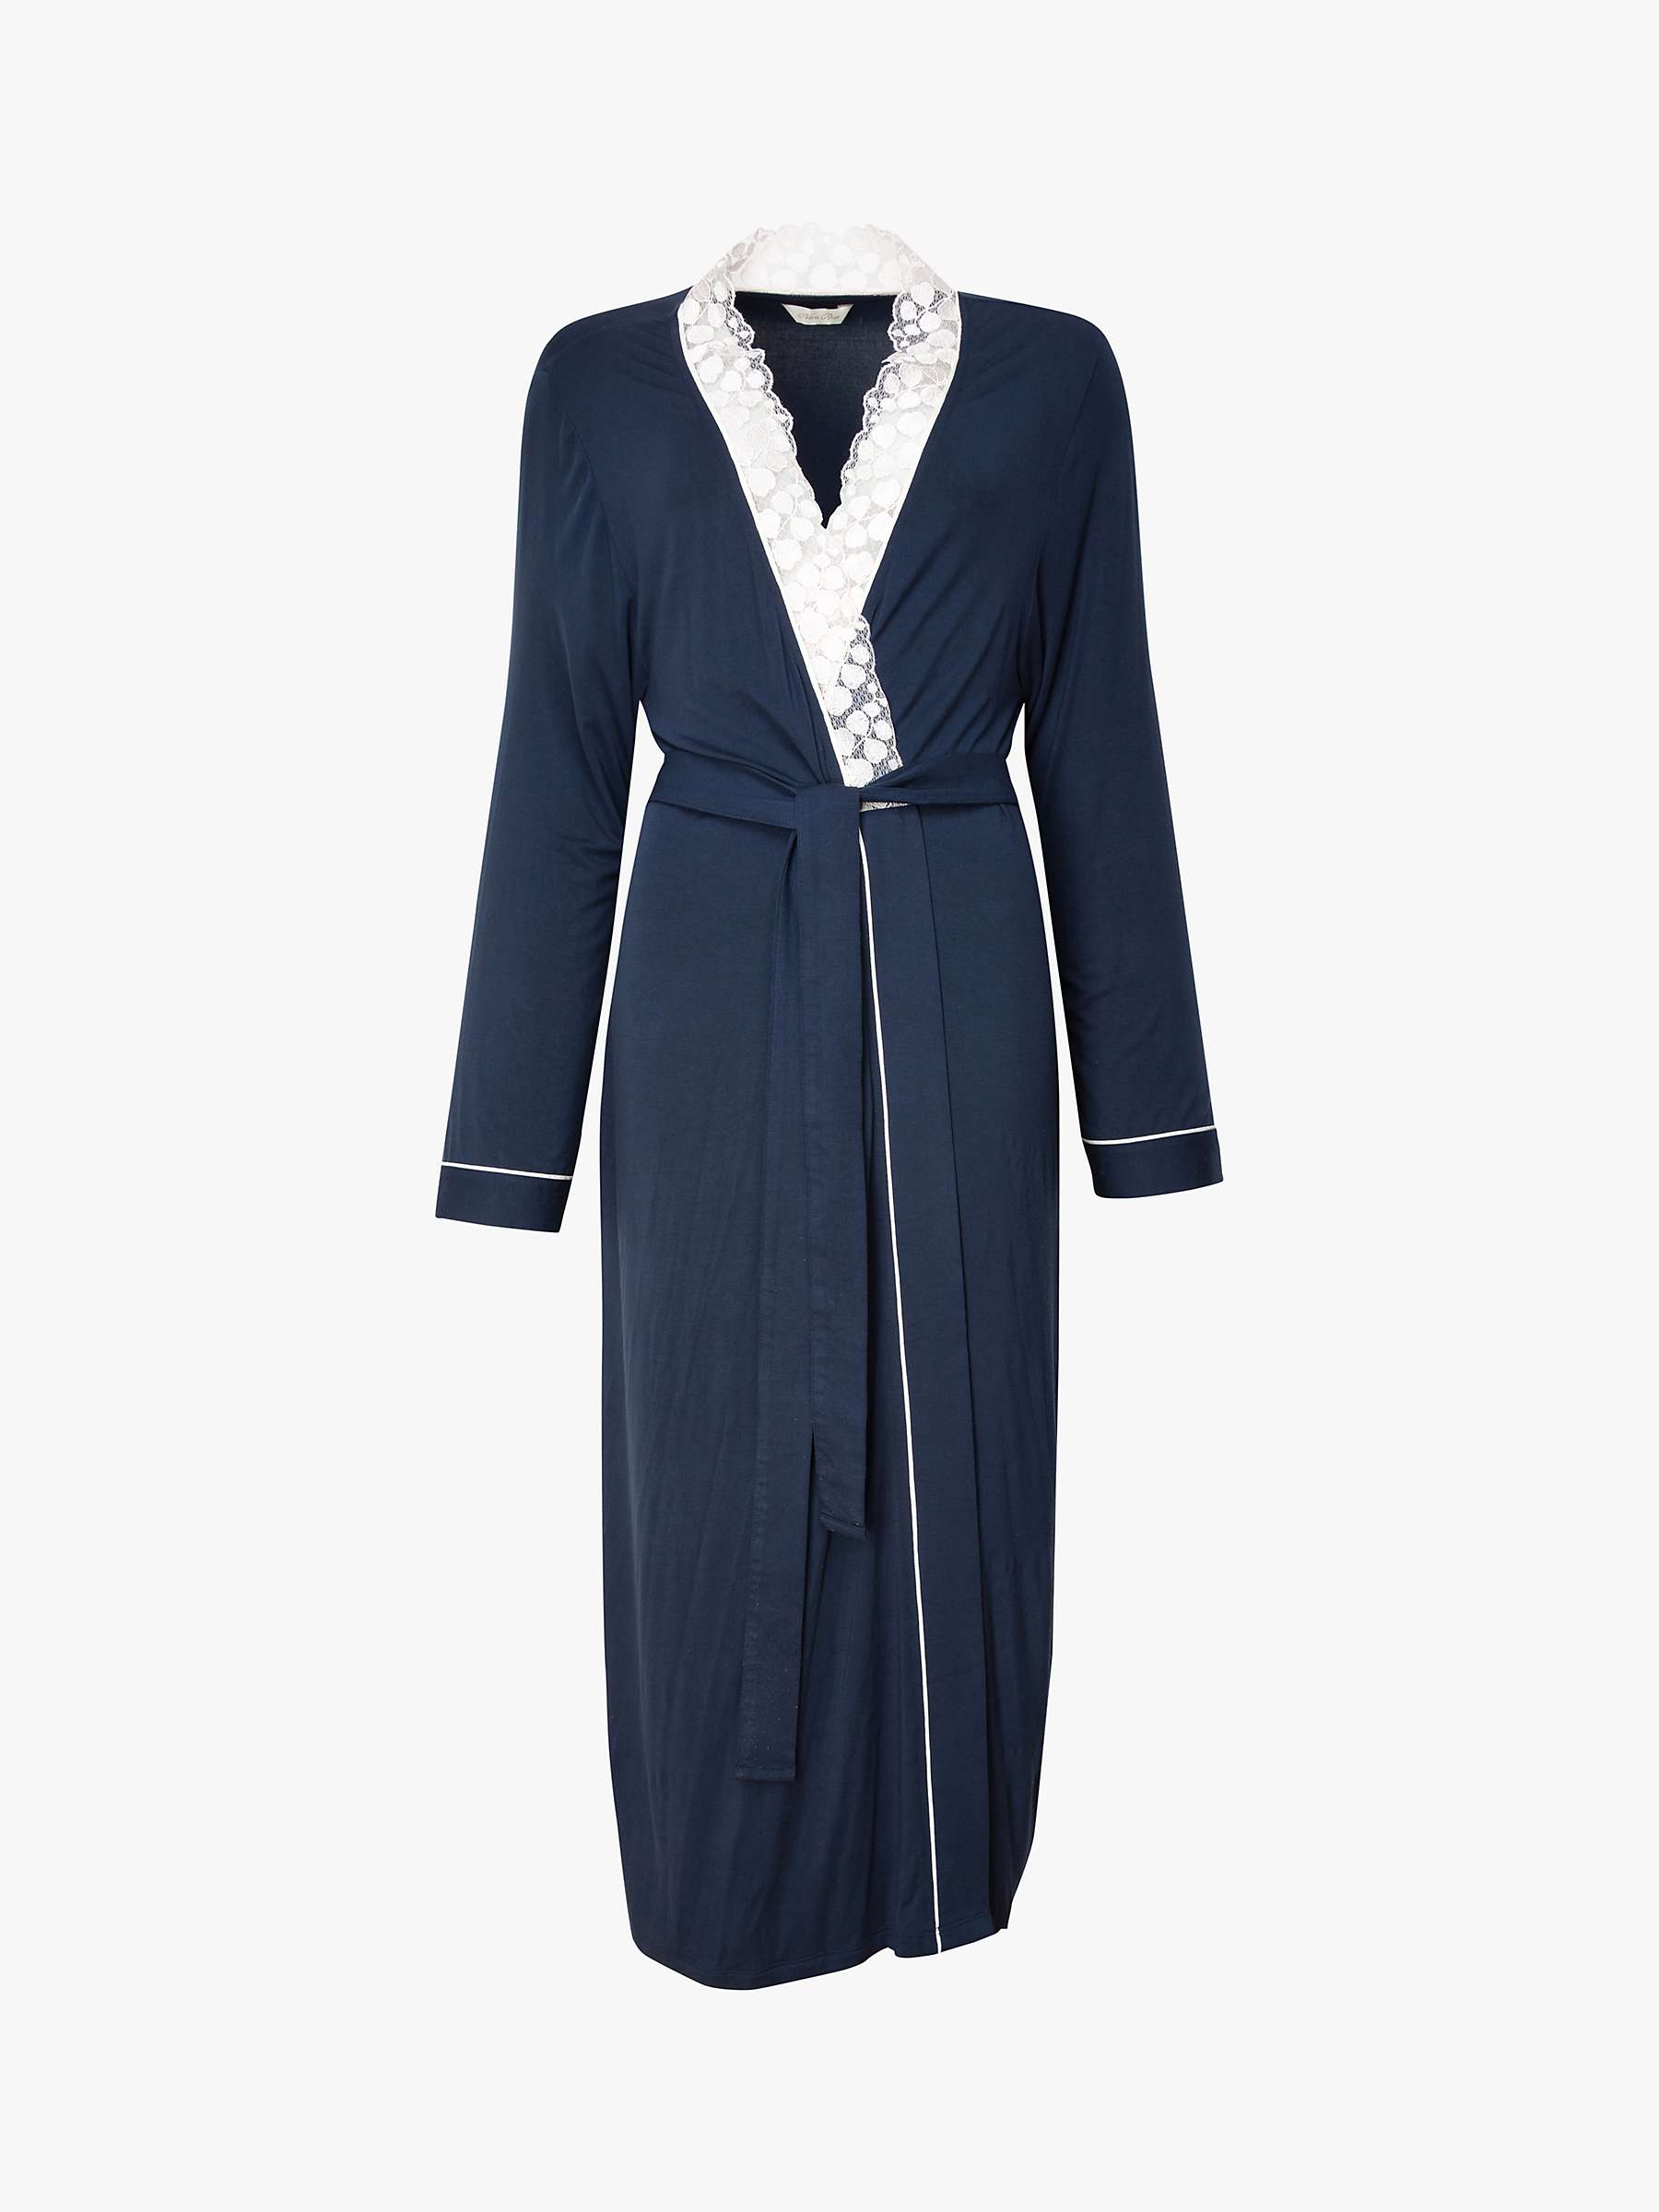 Buy Nora Rose by Cyberjammies Lace Trim Dressing Gown, Navy Online at johnlewis.com